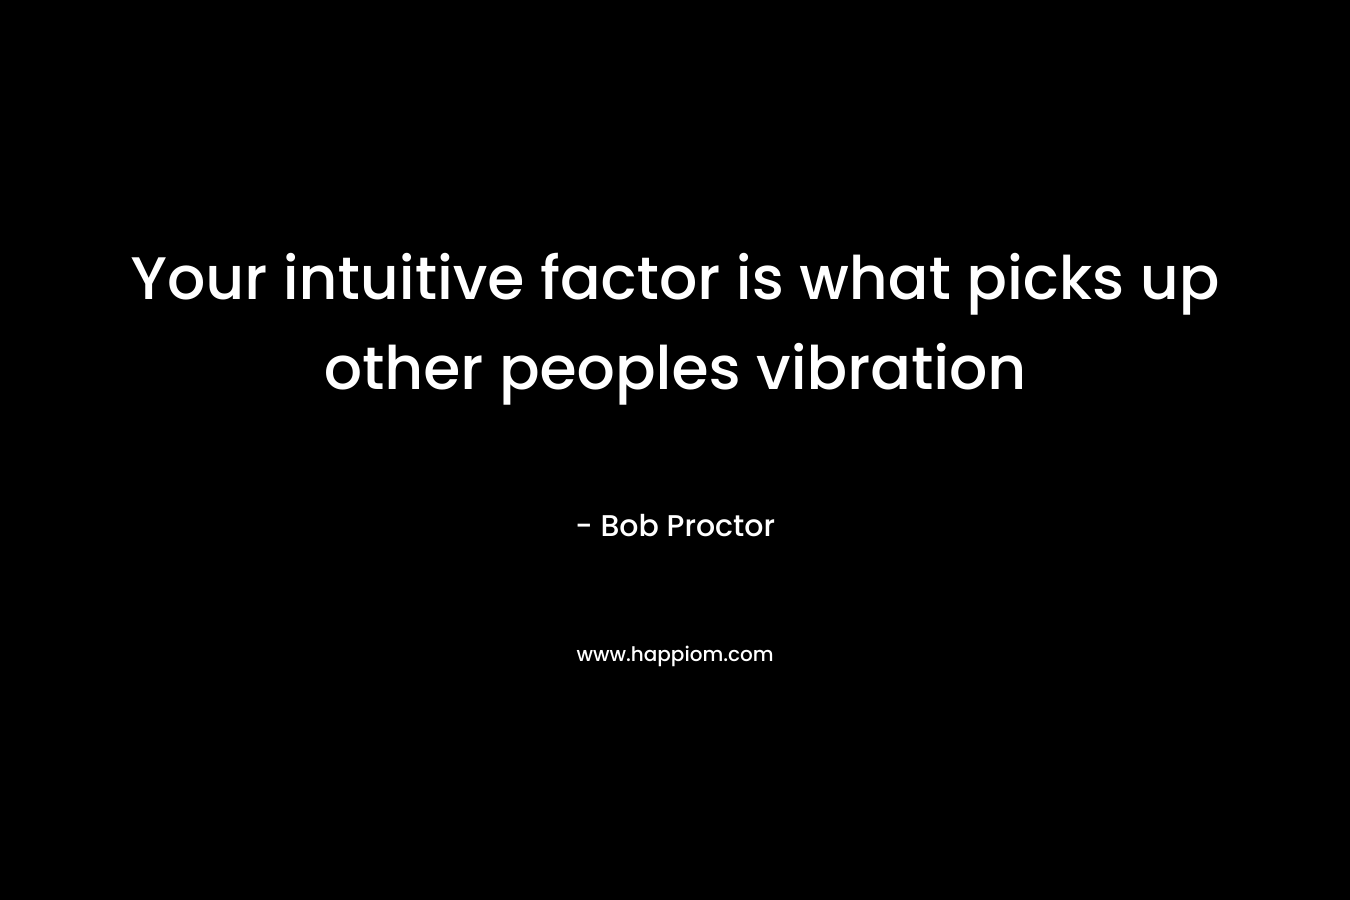 Your intuitive factor is what picks up other peoples vibration